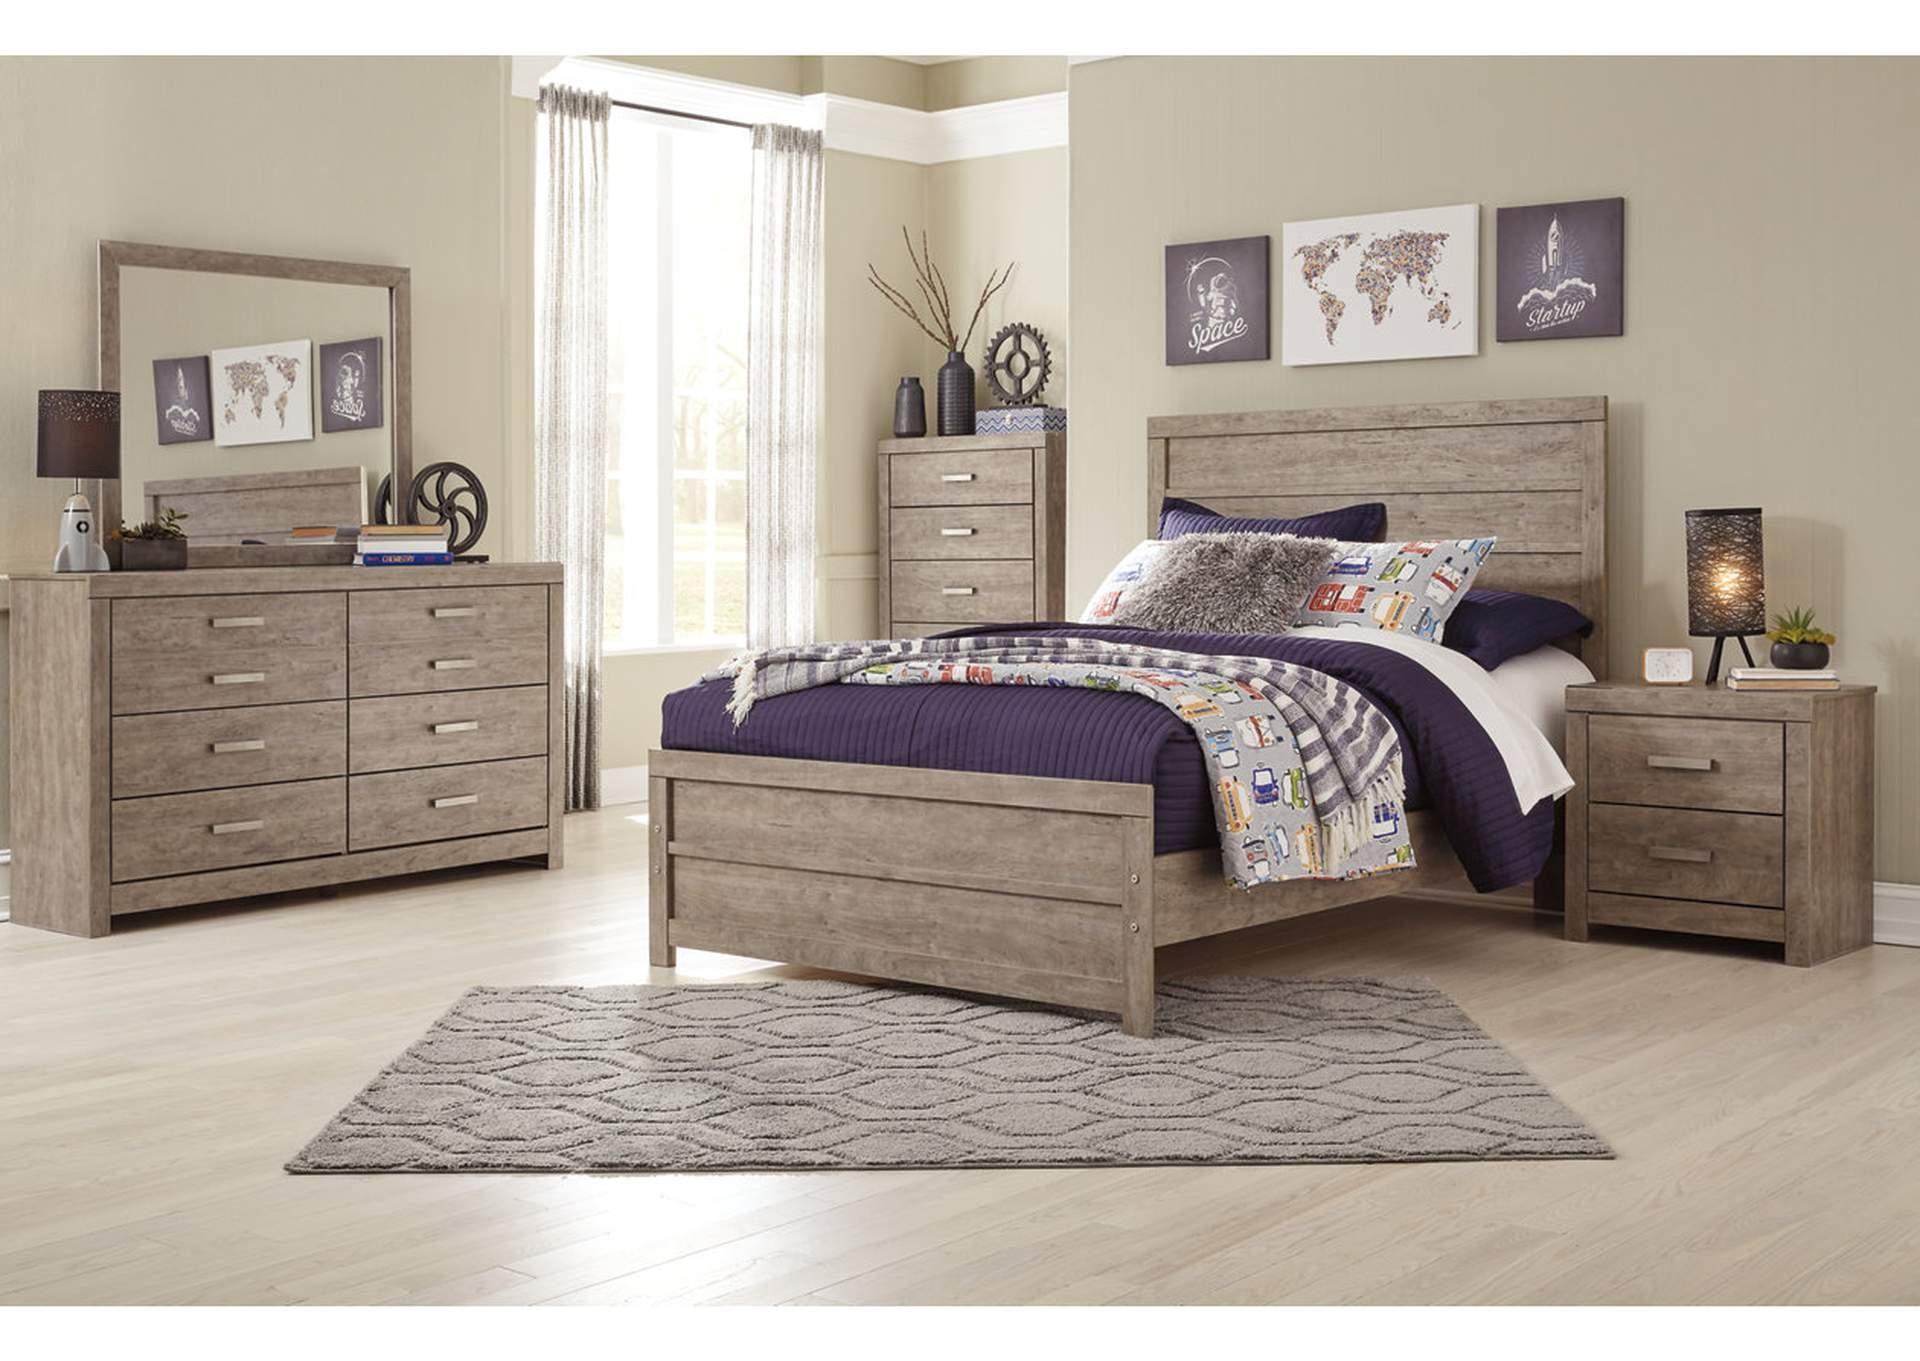 B070 Queen Panel Bed, Dresser, Mirror, Chest, ! Night Stand,In-Store Product